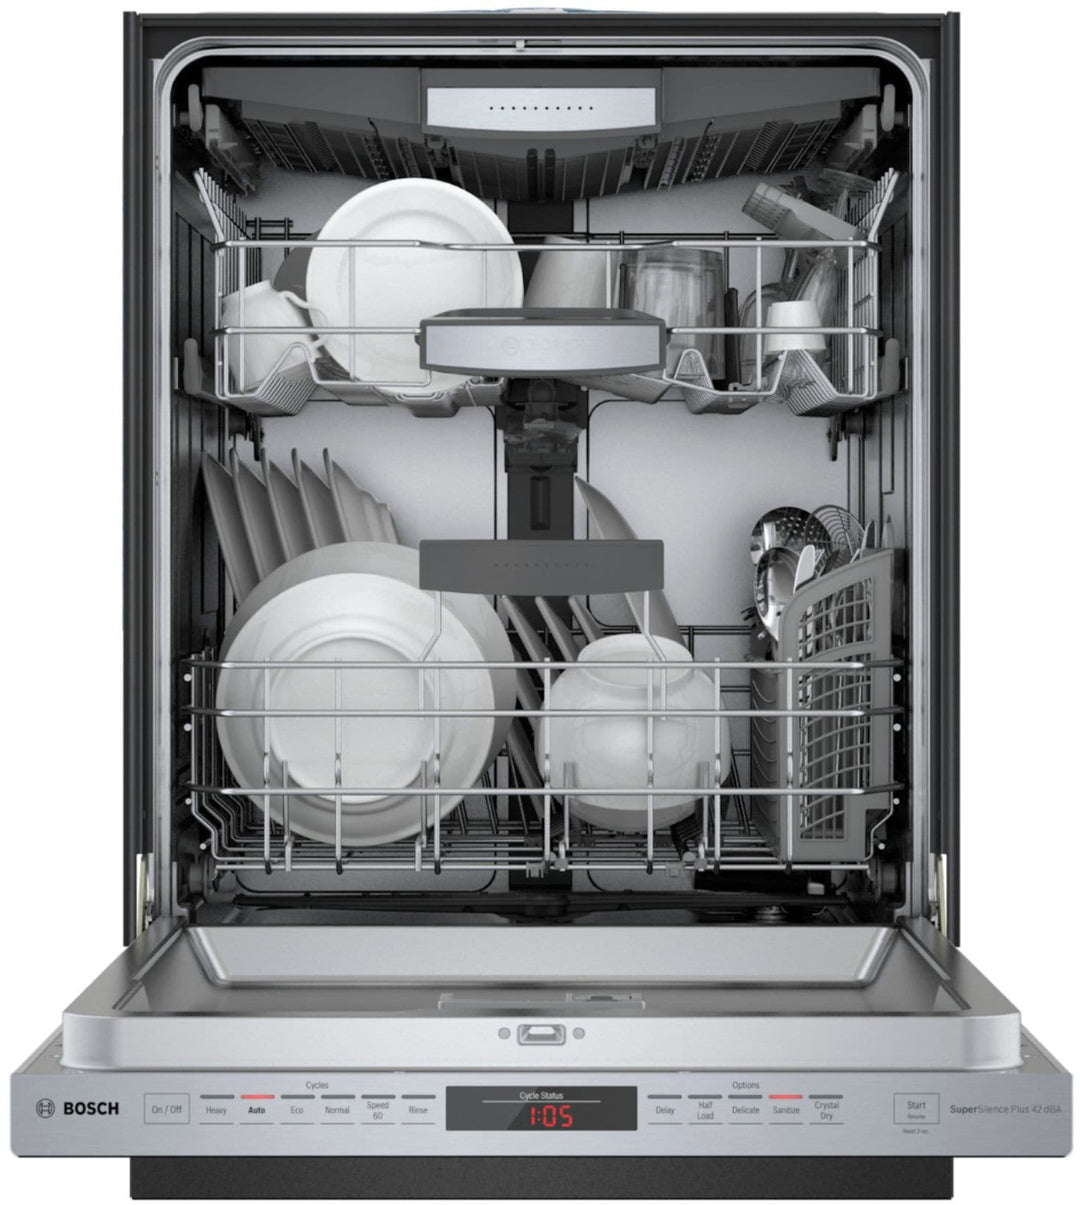 Bosch - 800 Series 24" Top Control Built-In Dishwasher with CrystalDry, Stainless Steel Tub, 3rd Rack, 42 dBa - Stainless steel_14